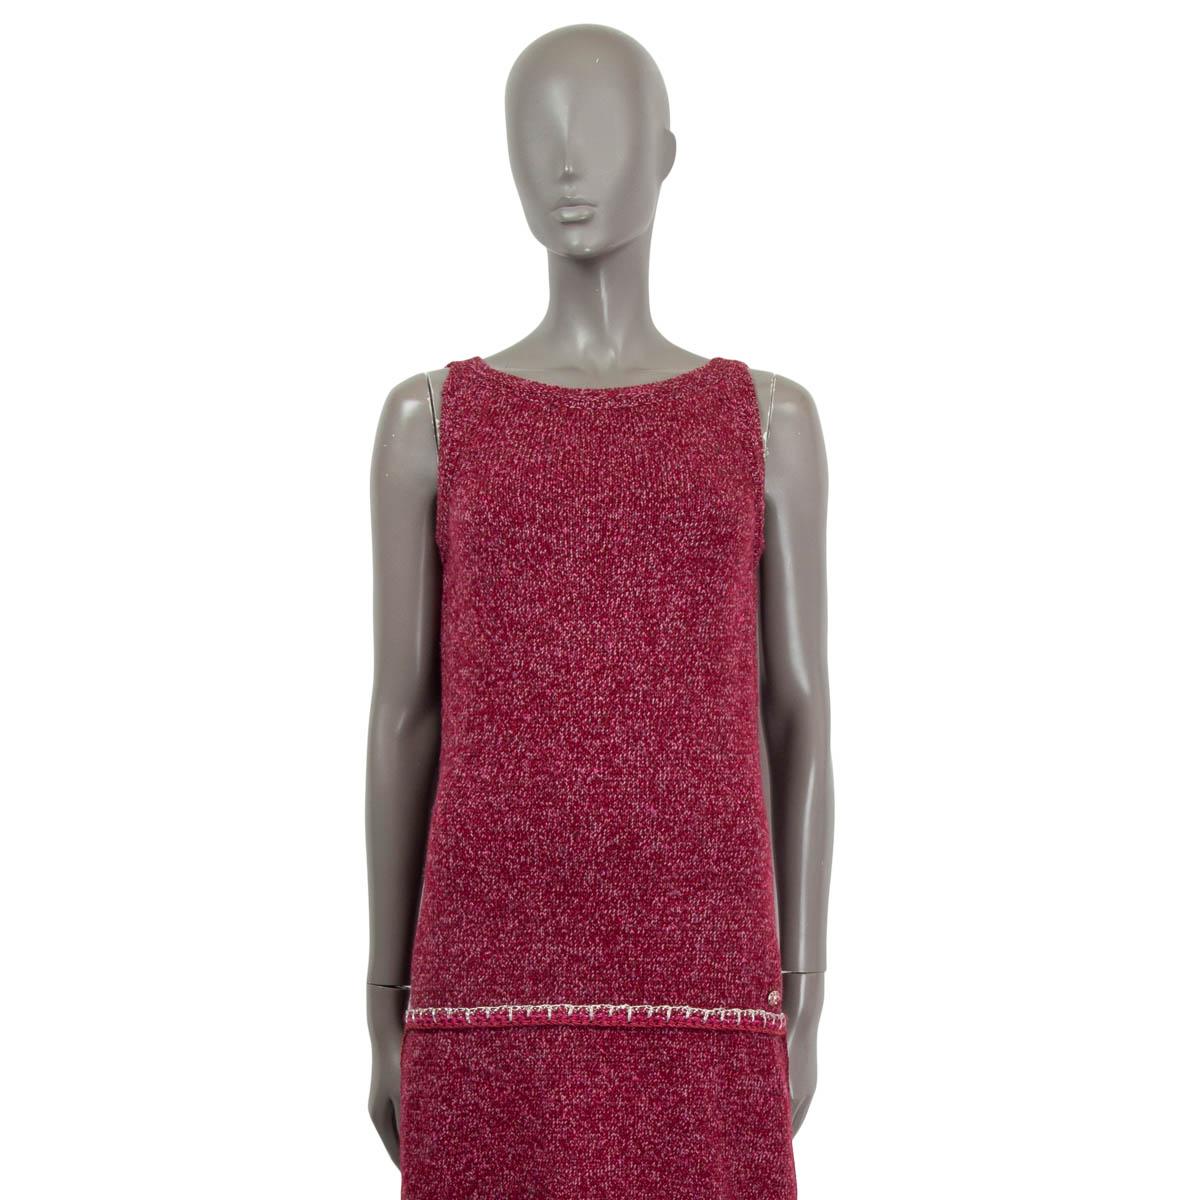 100% authentic Chanel 2016 crochet trim sleeveless knit dress in raspberry cashmere (81%) and silk (19%). Features zipped sides, a drop waist and a pink 'CC' emblem at the front. Semi-lined in raspberry silk (100%). Brand new, with tags.

Matching